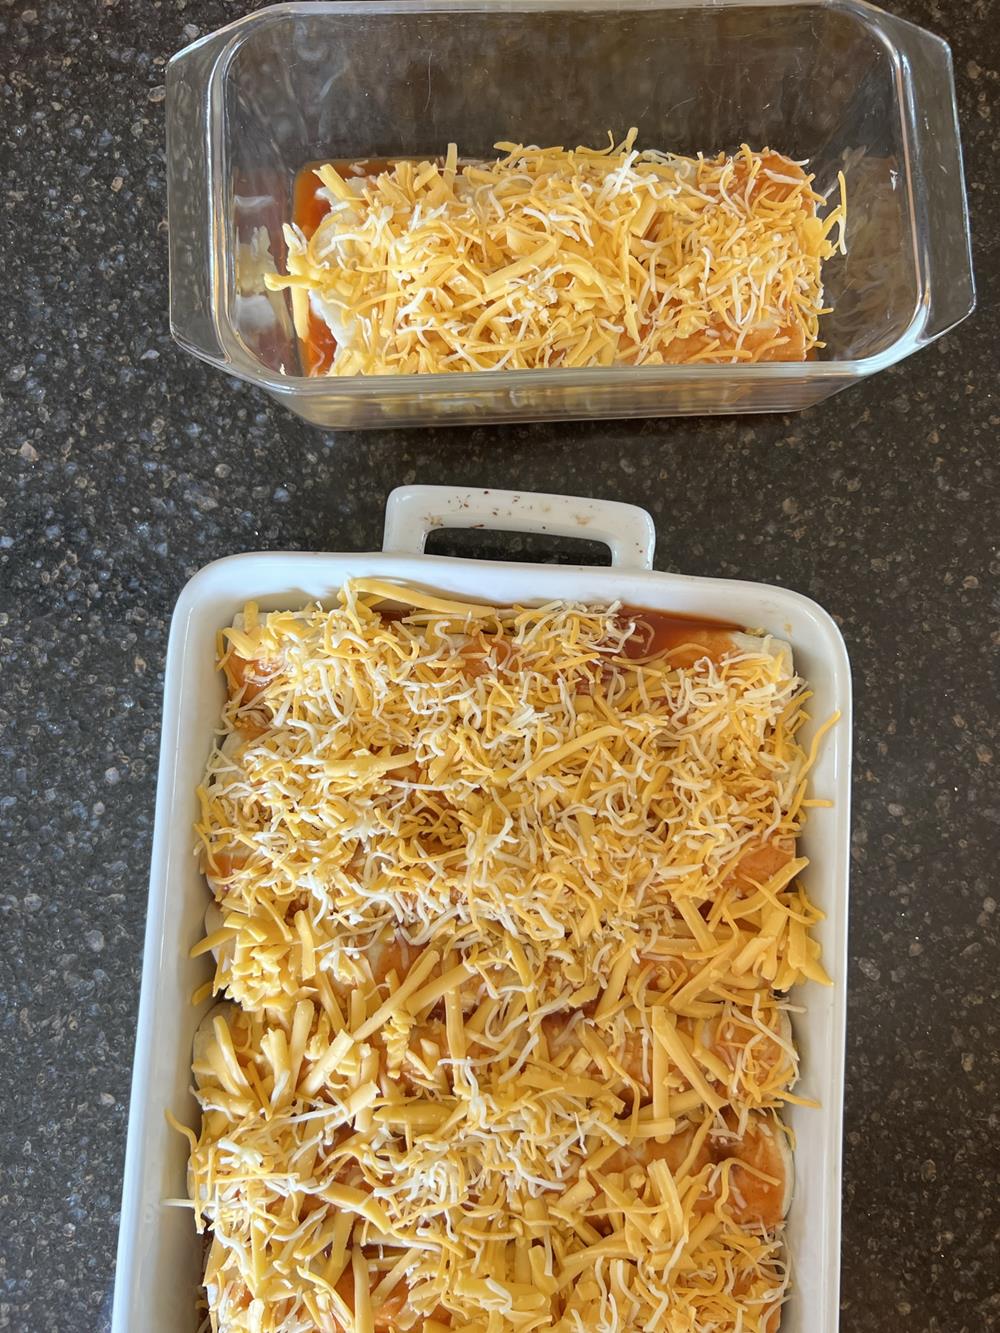 two pans of enchiladas, one in glass dish and one in white baking dish